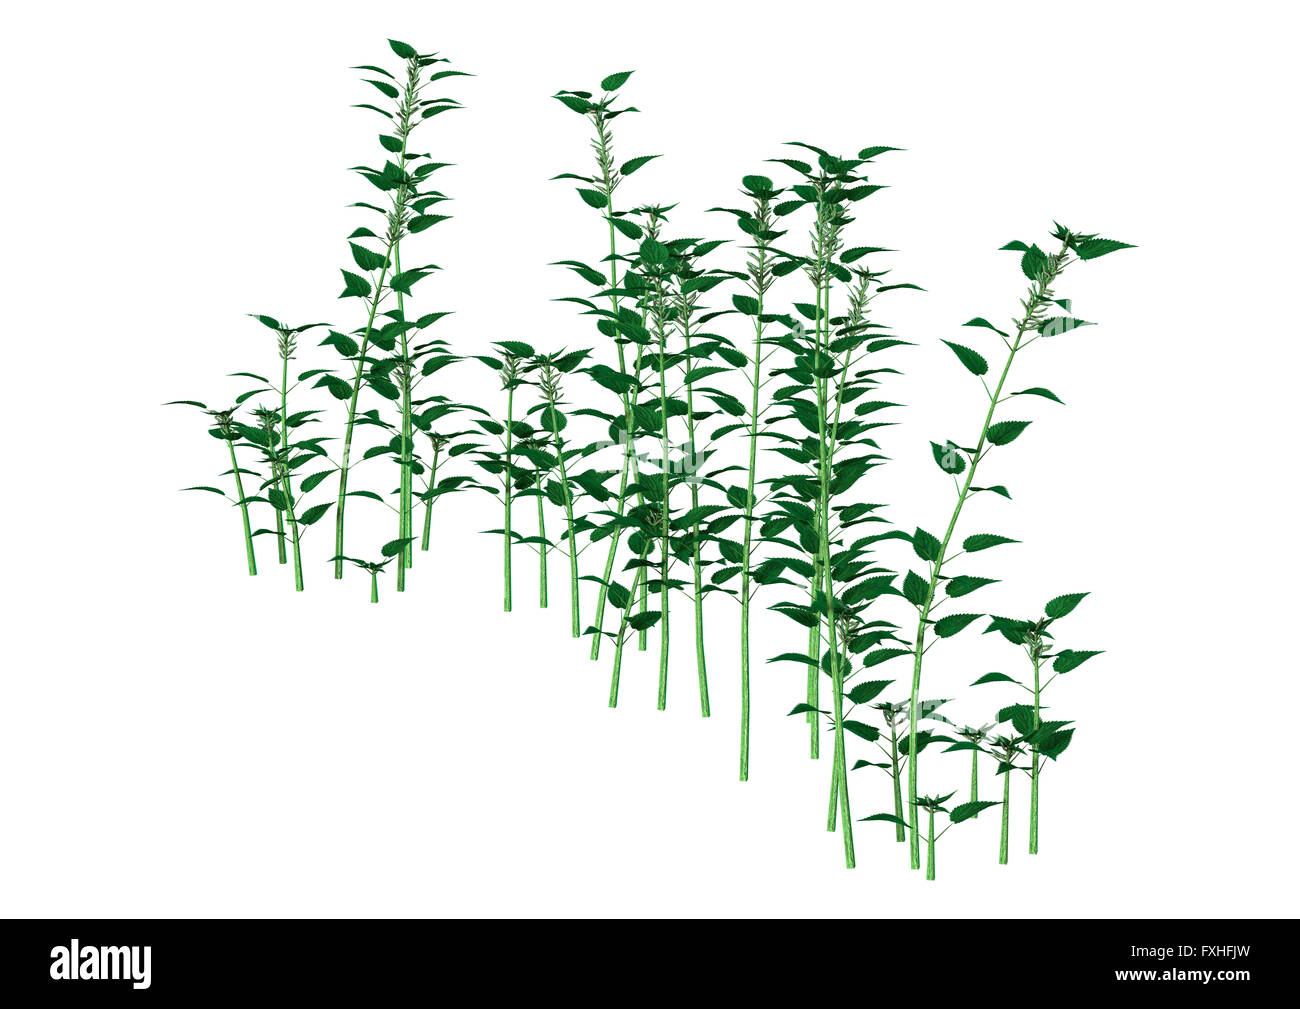 3D Illustration of a urtica dioica, or common nettle or stinging nettle, isolated on white background Stock Photo